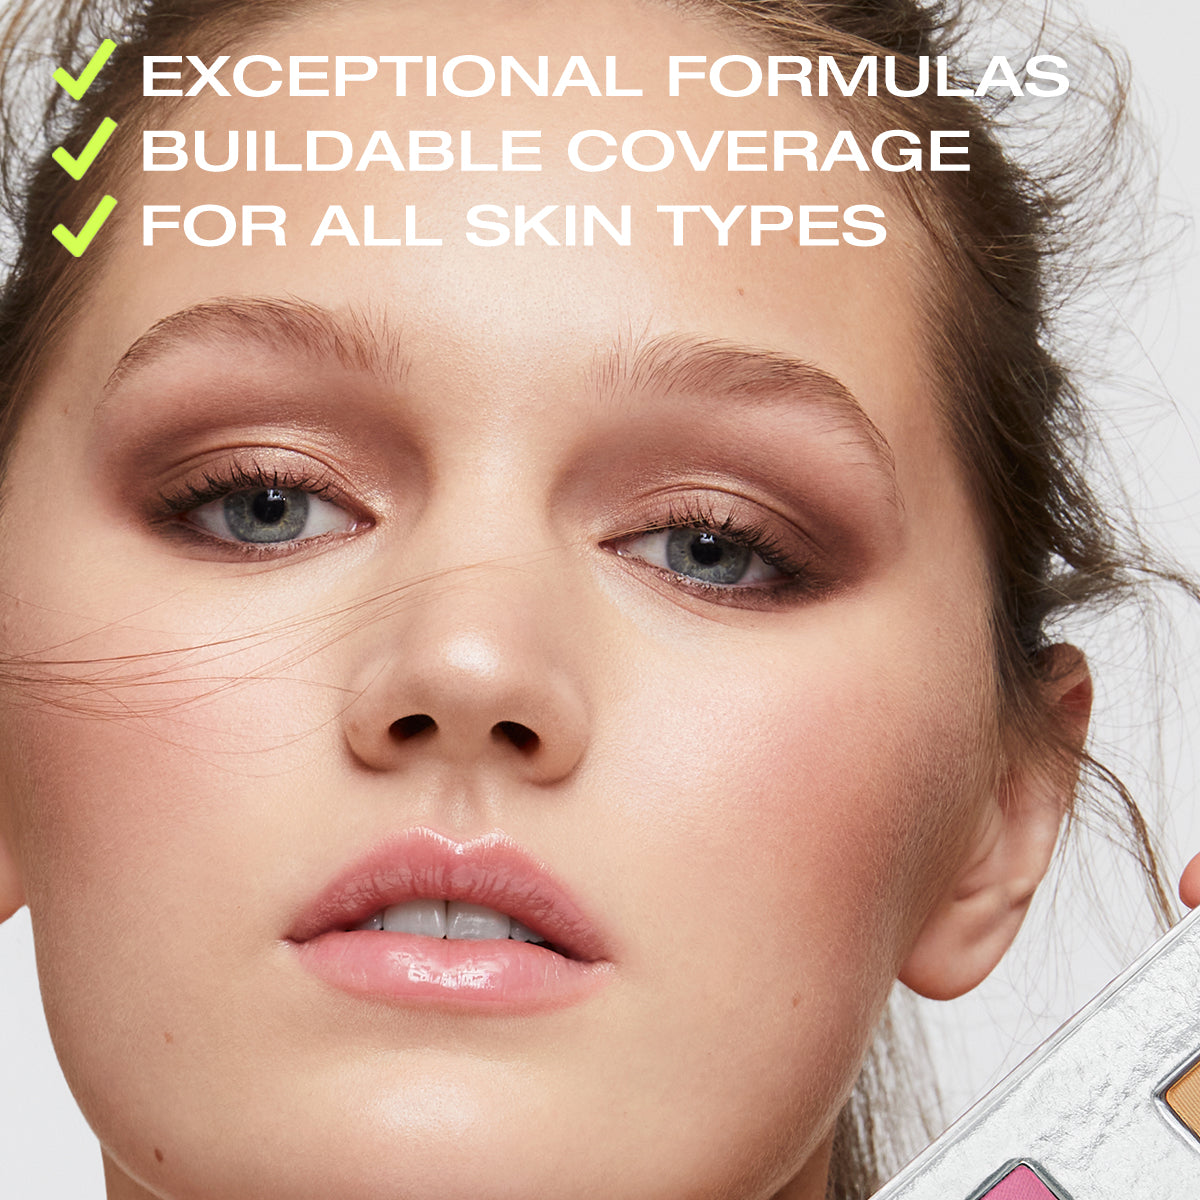 a photo of a beautiful woman with copy on top stating that the coverage in the Fold Out Face is buildable, and the formulas are clean & good for all skin types